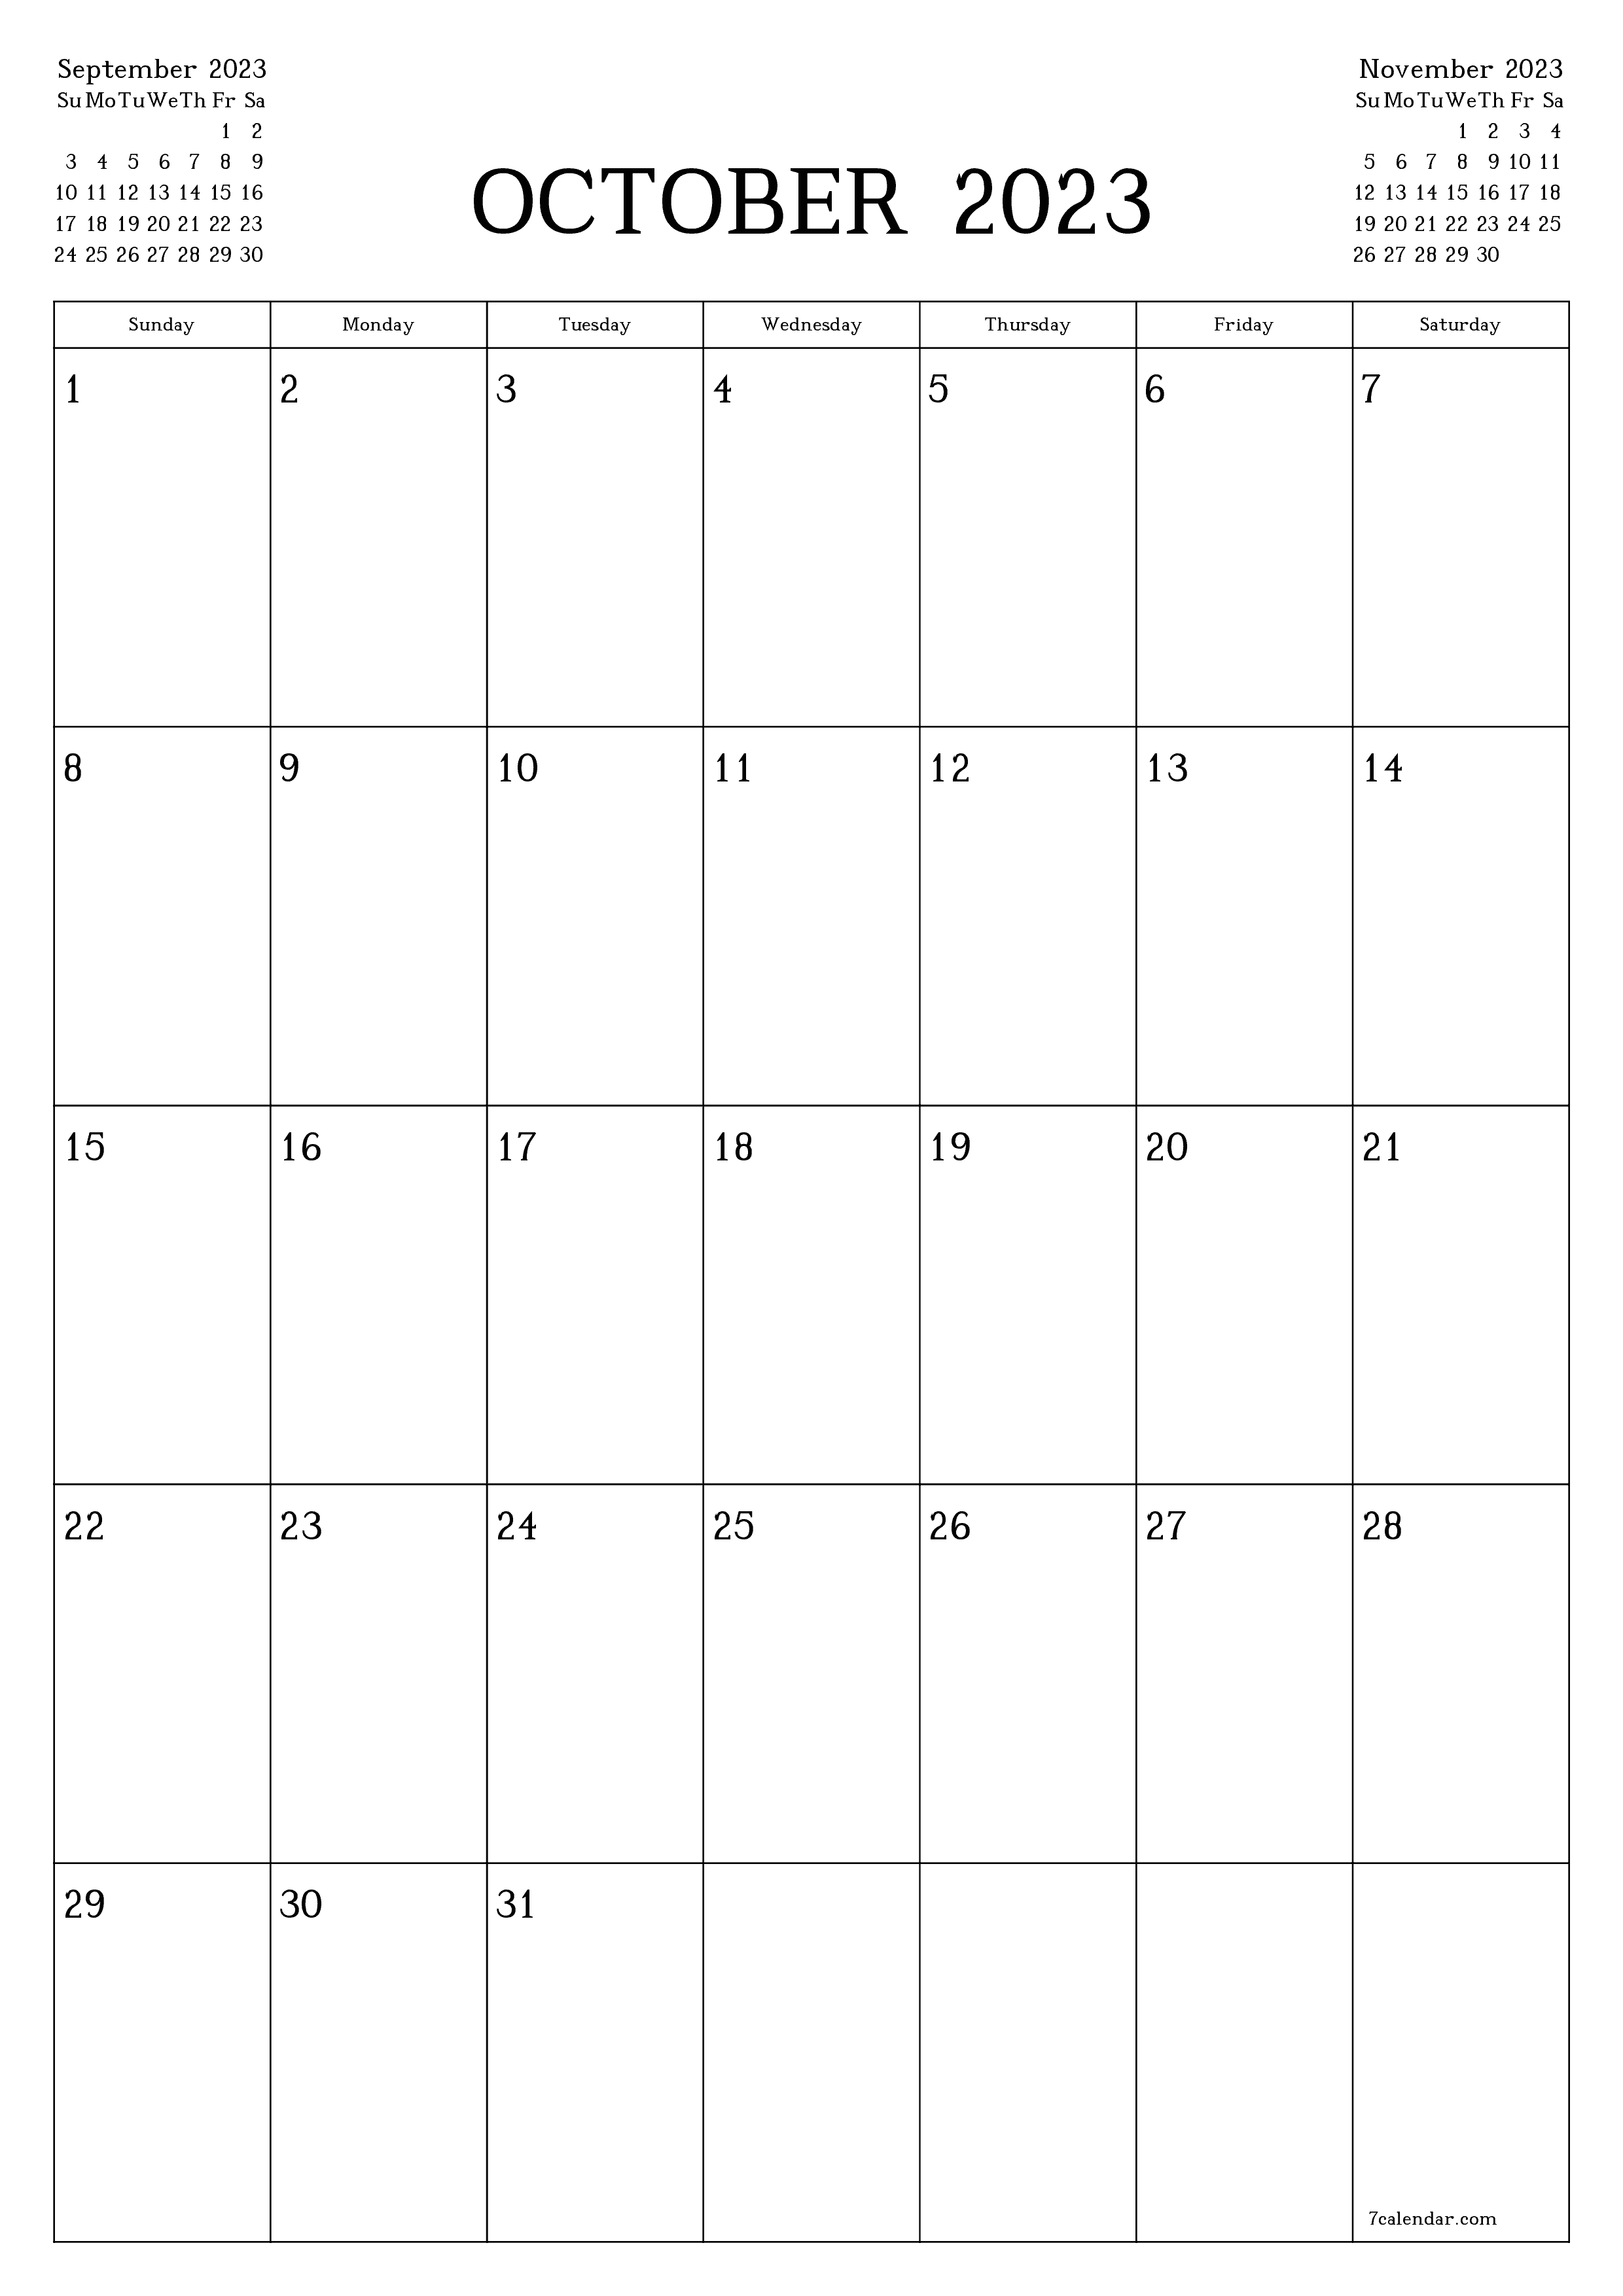 Blank monthly printable calendar and planner for month October 2023 with notes save and print to PDF PNG English - 7calendar.com